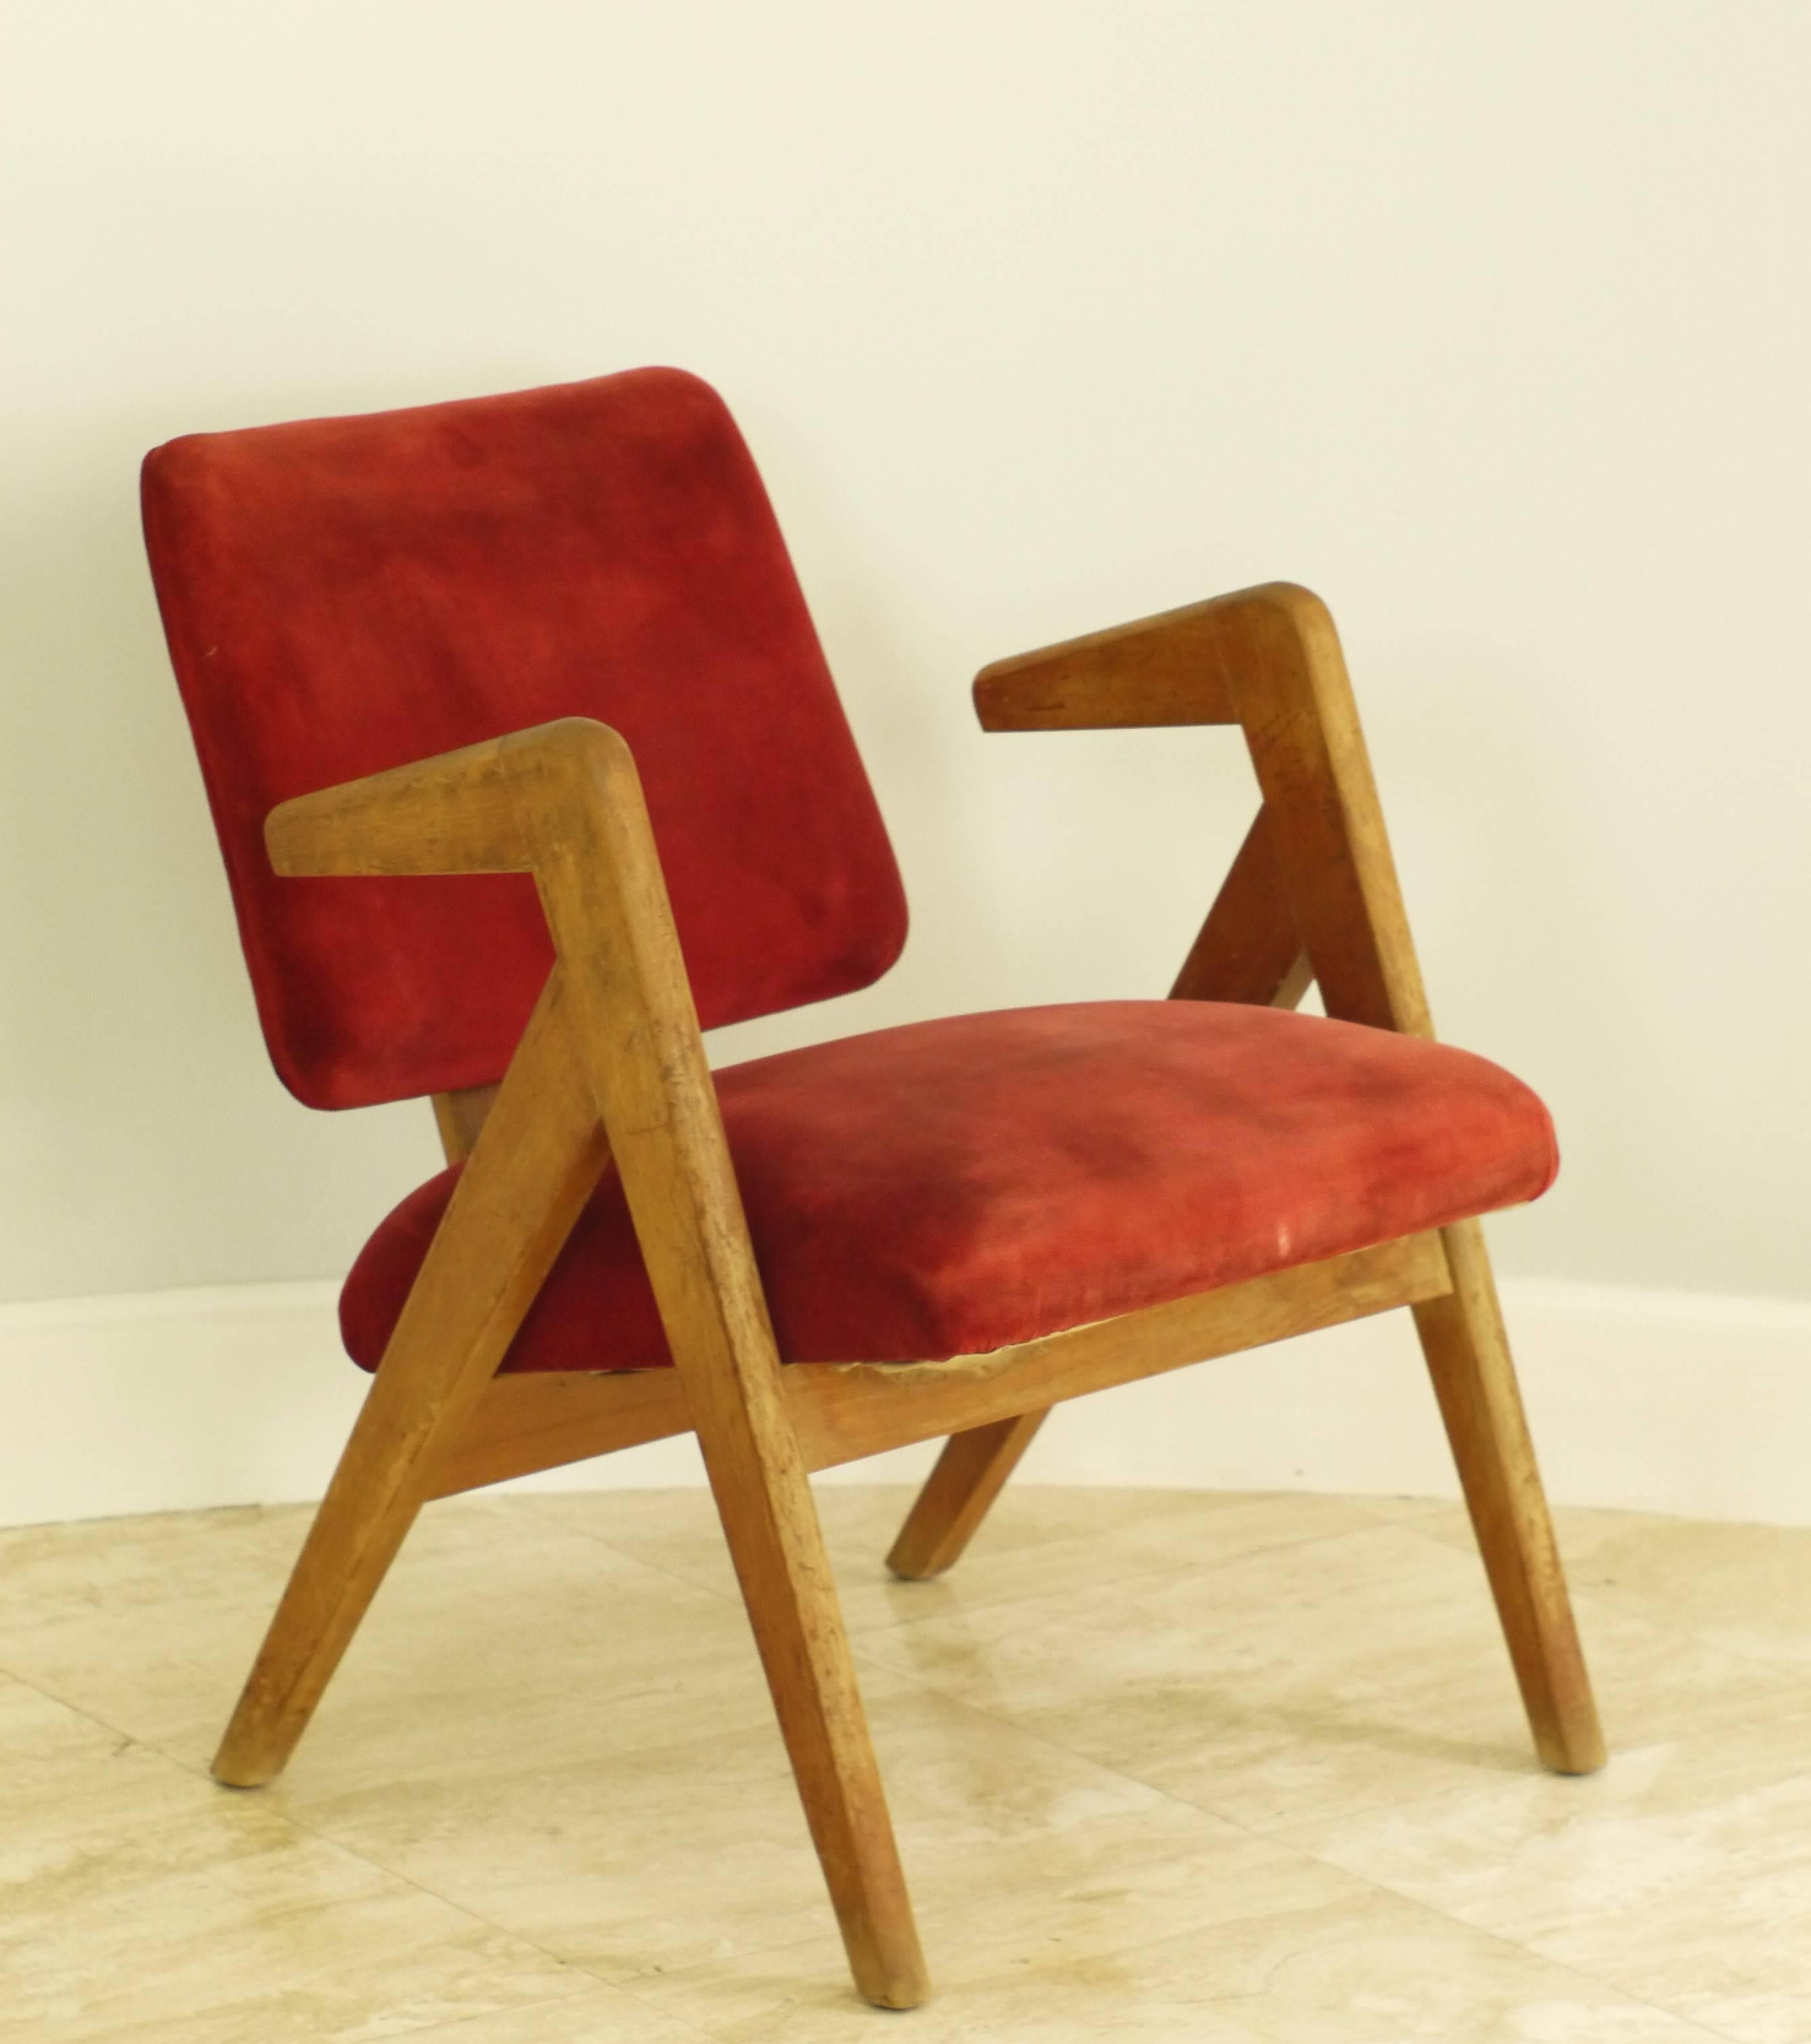 Rare Hillestak armchair by Robin Day for Hille in1951. Red fade velvet on wood frame. Original condition.